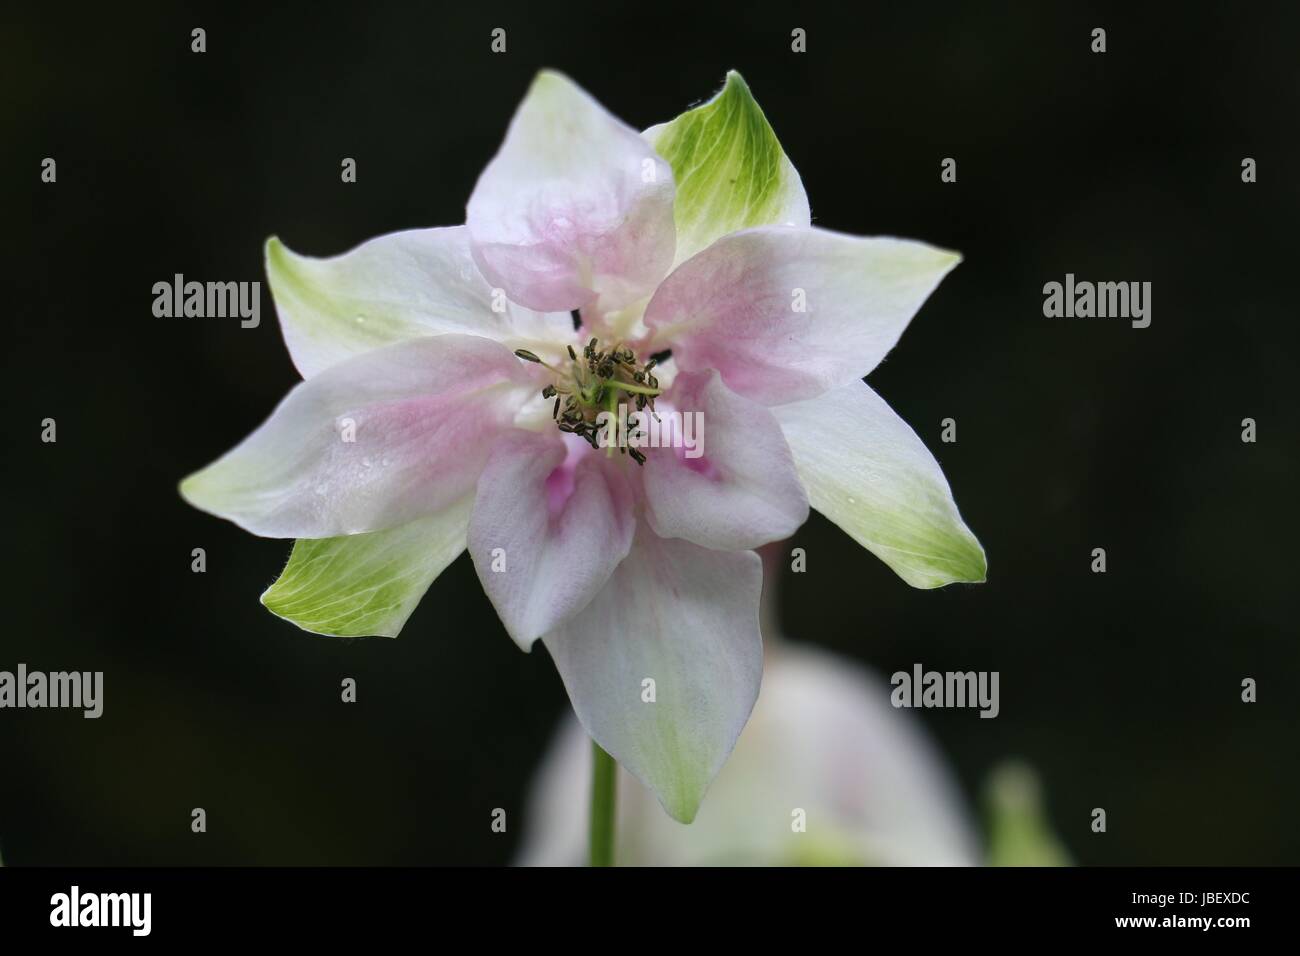 Pink and white Aquilegia flower, Columbine or Grannys Bonnet with white and green sepals flowering in summer, England on a dark background. Stock Photo